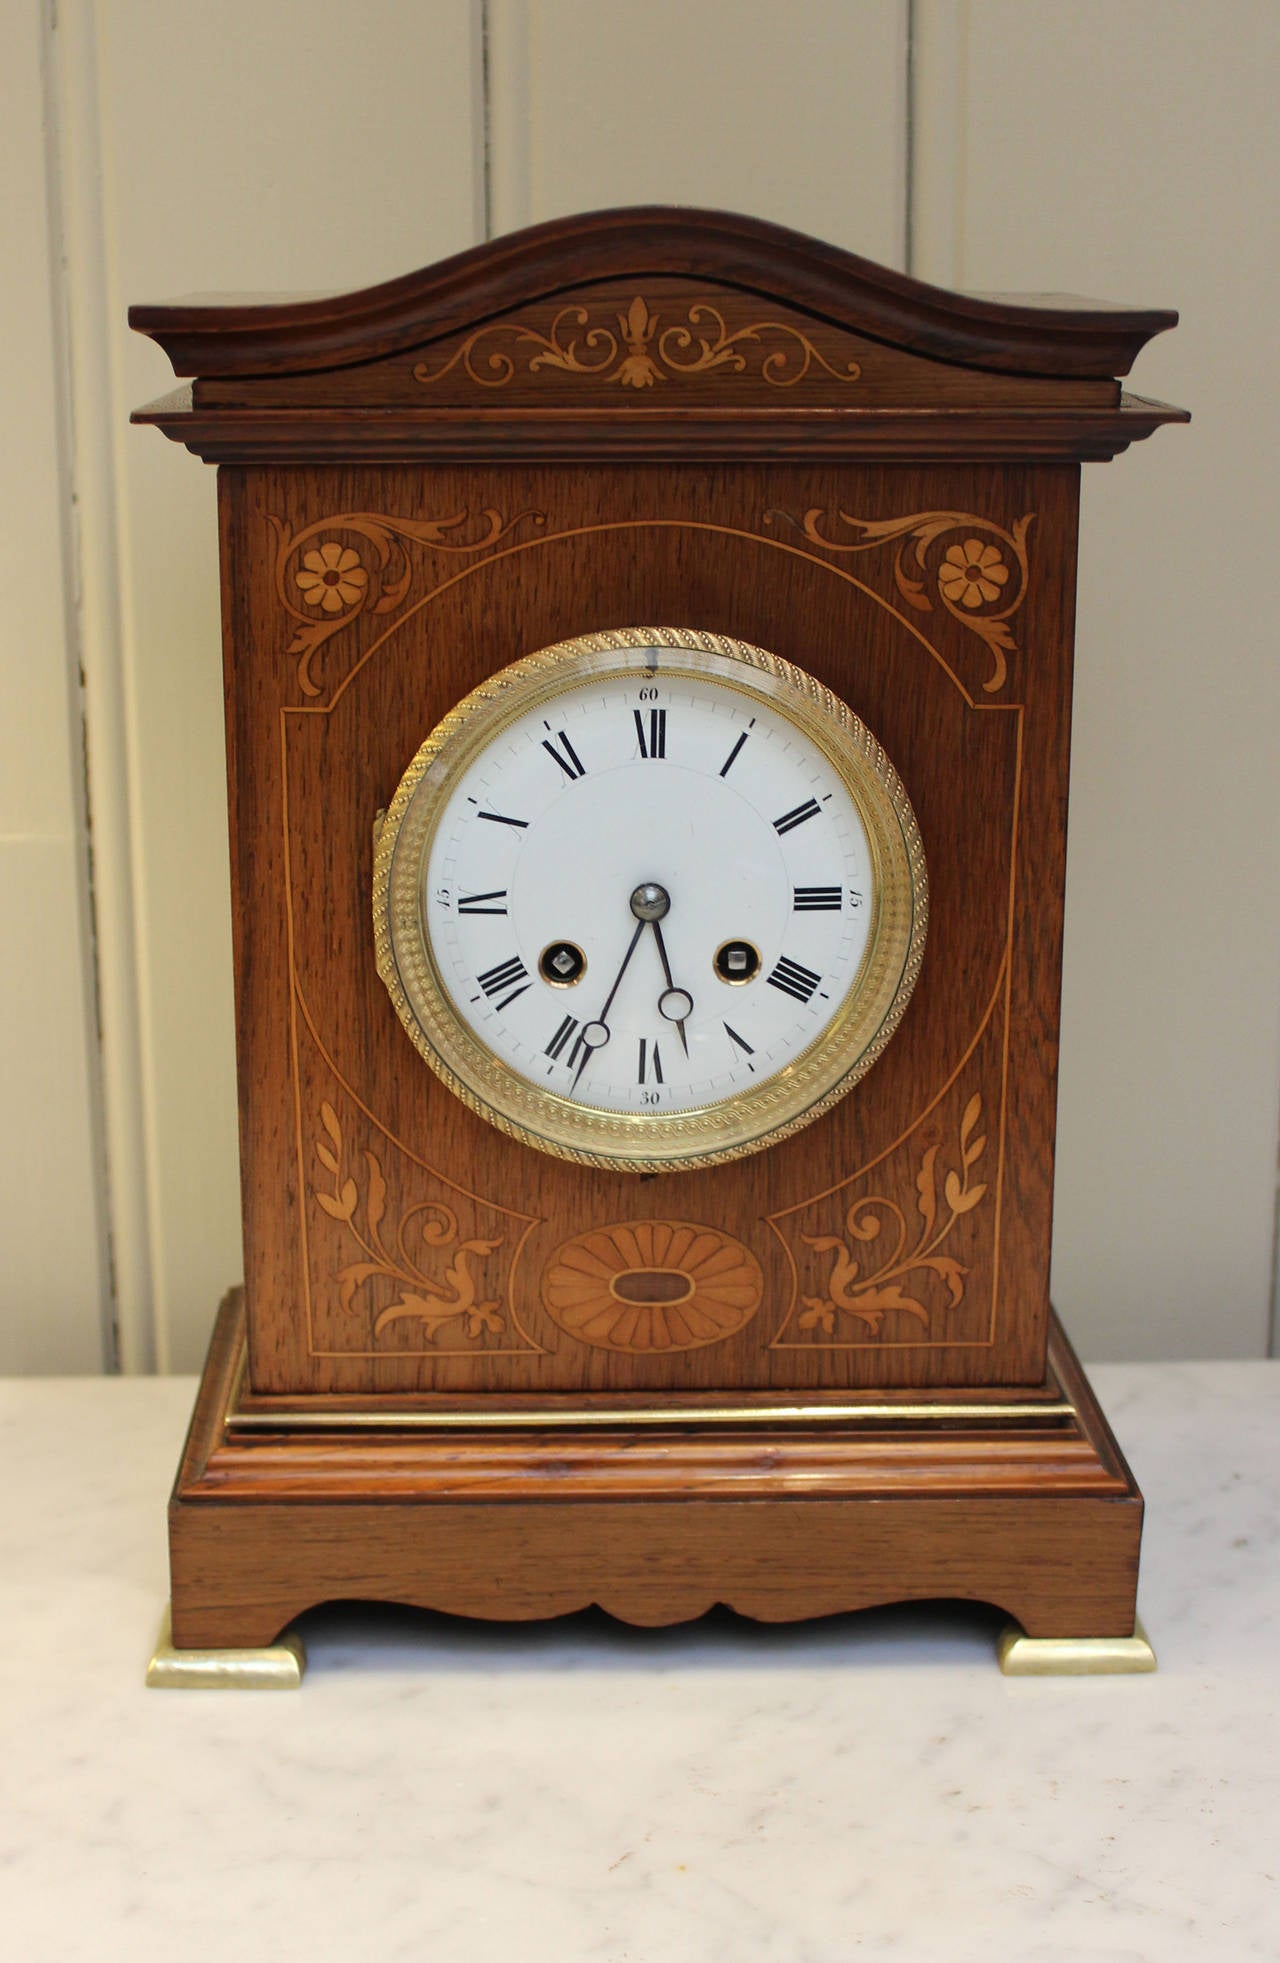 A good quality French mantel clock.The rosewood case has a swept arch top with boxwood and satinwood marquetry inlay. It has a fine cast embossed bezel and inner sight ring with a bevel edge glass and an enamel dial. The 8 day movement strikes the